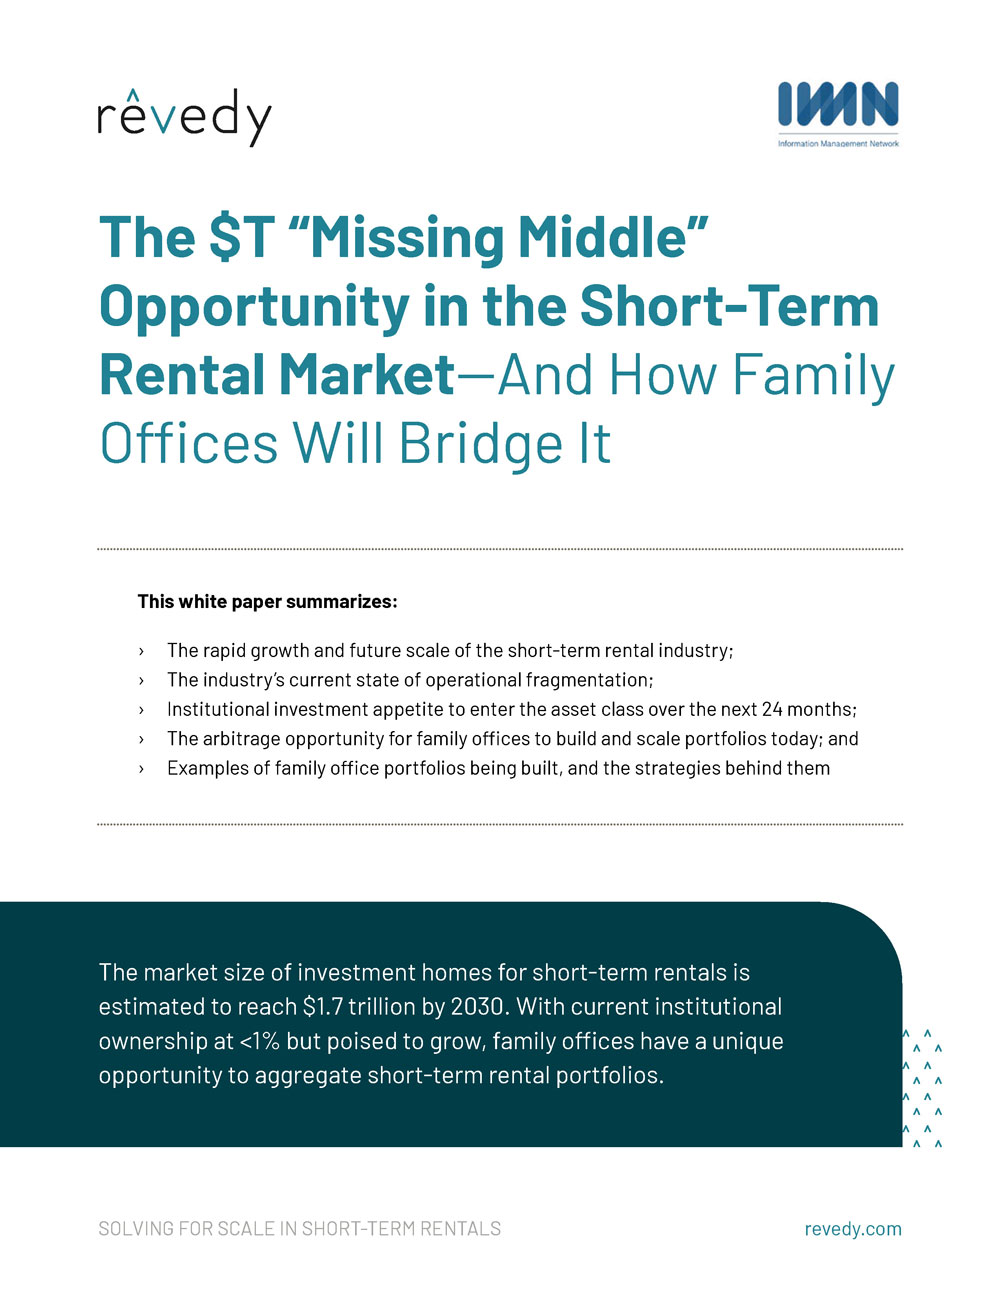 Short-term rental investing for family offices